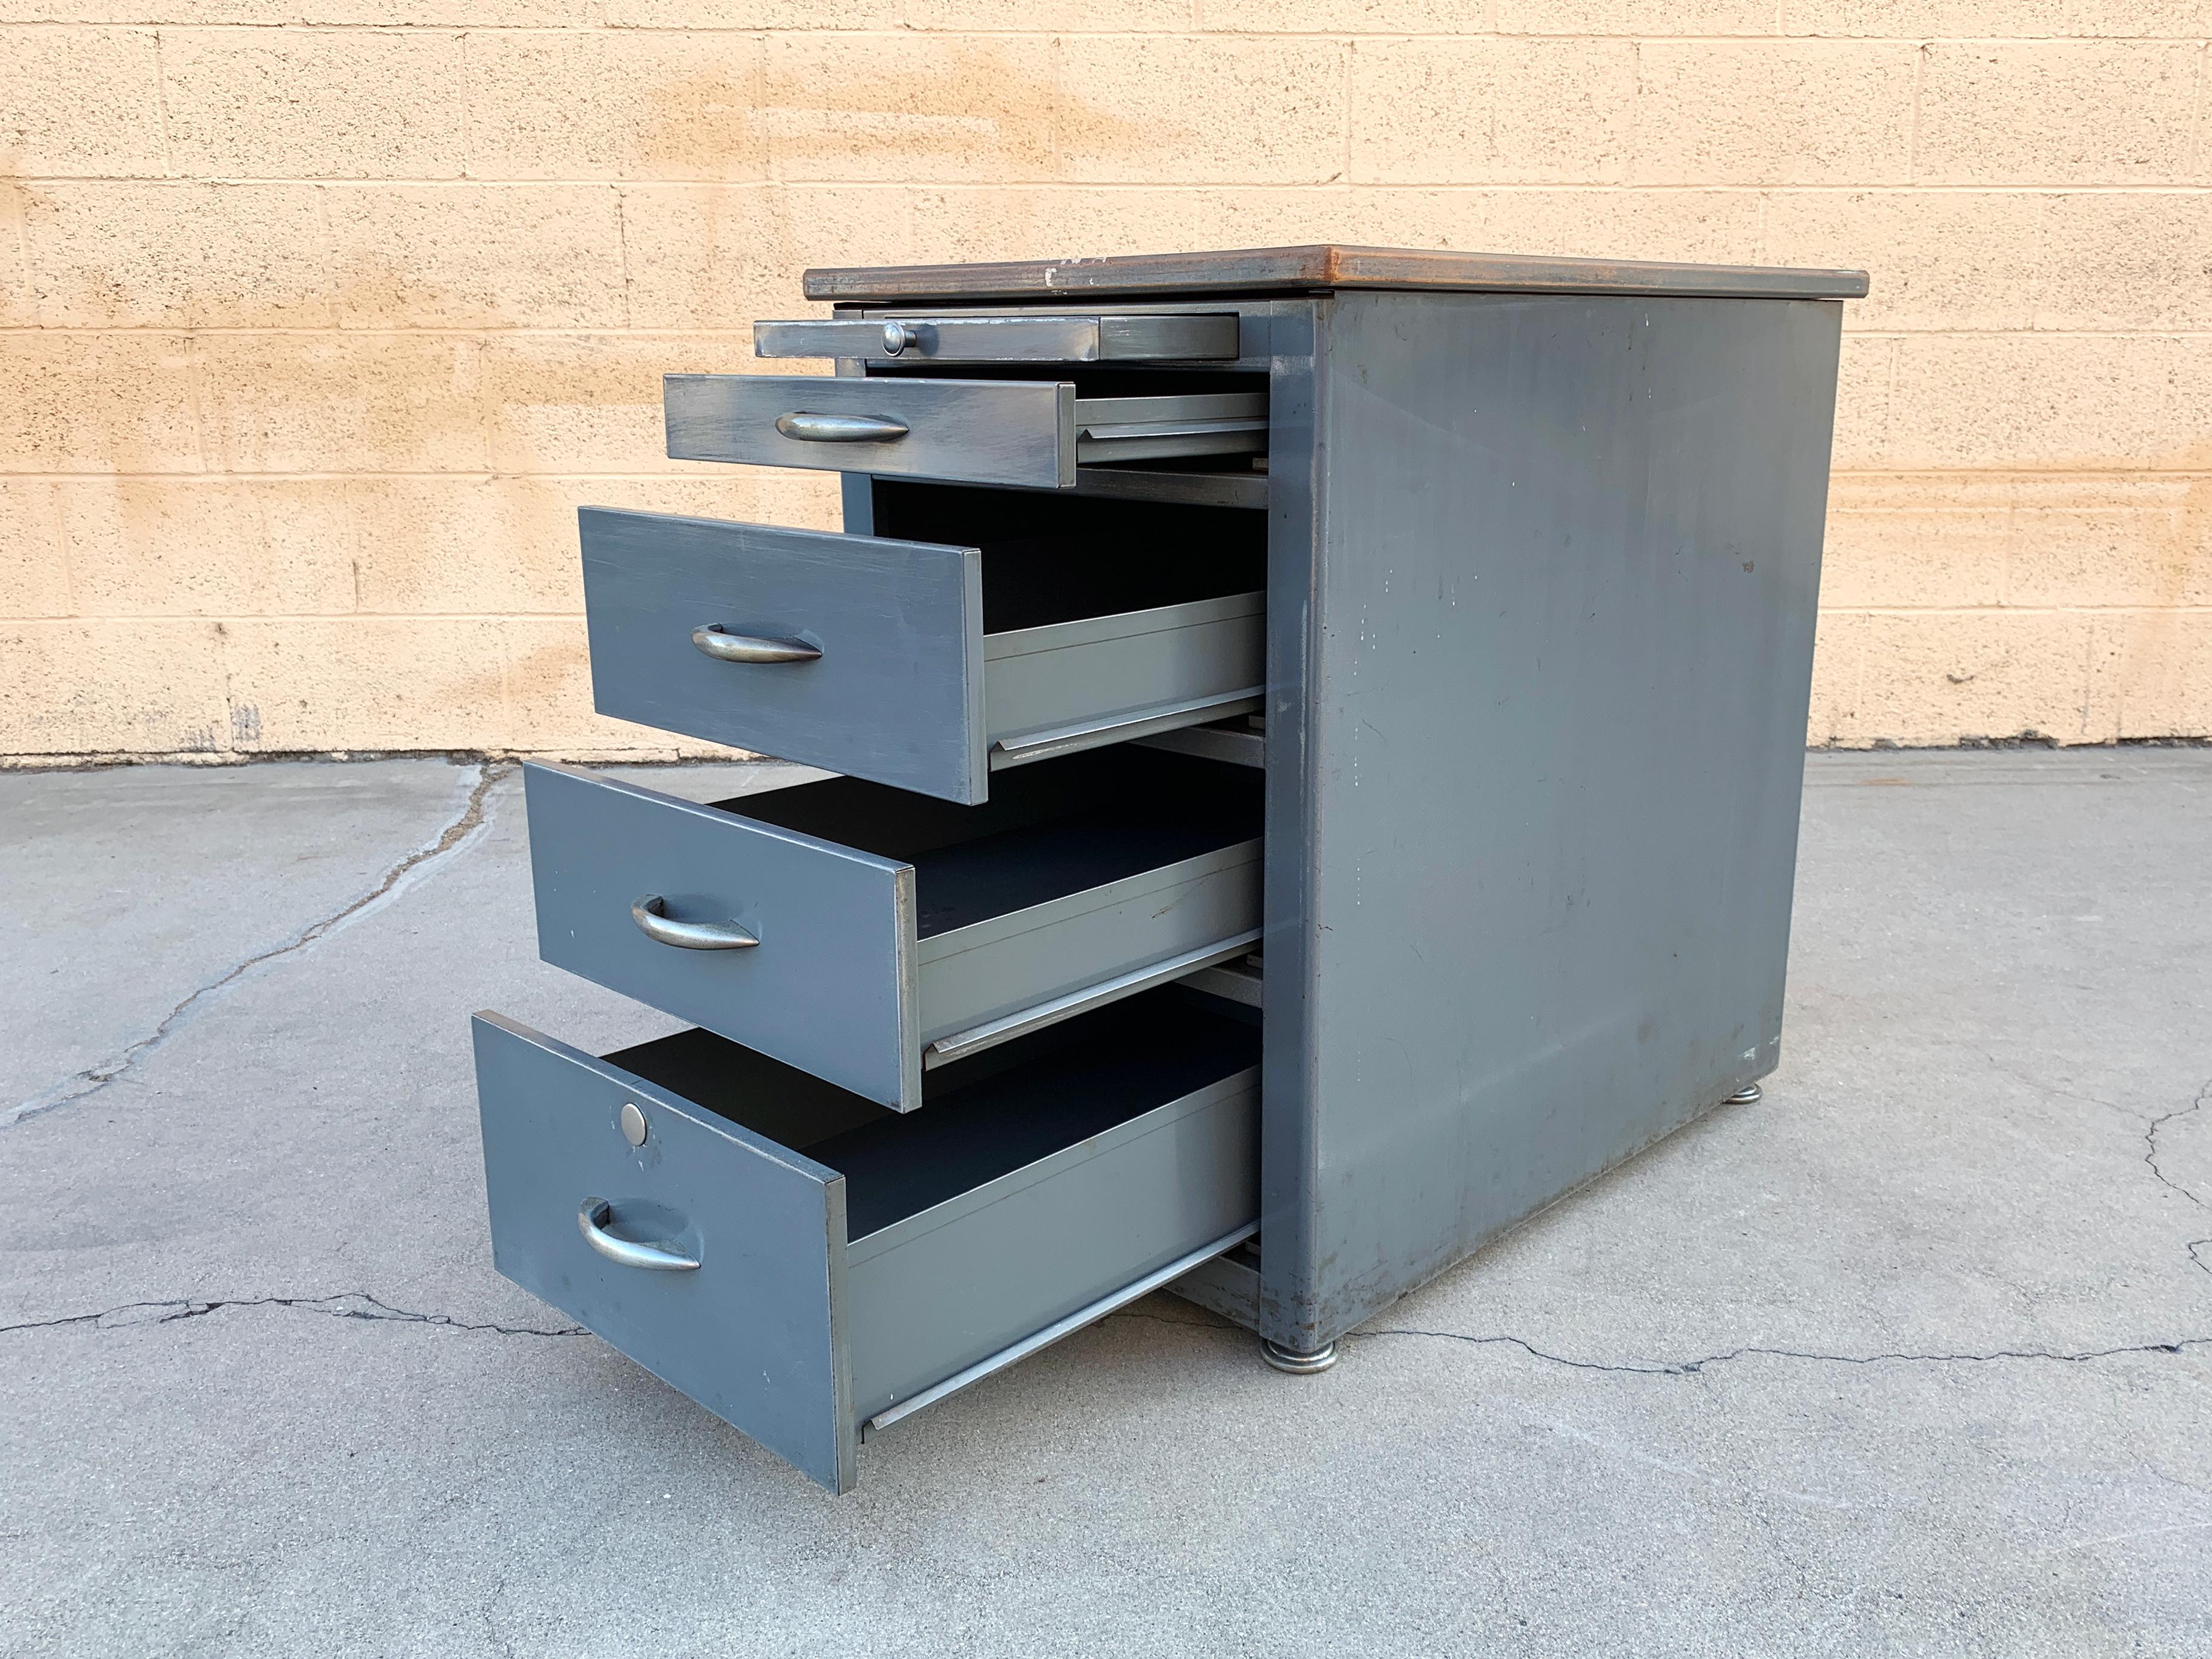 1960s tanker office cabinet by Tab Products Co., San Francisco. This heavy-duty, versatile piece features 4-drawers and a paper tray. The all steel body with thick Masonite and Formica top is in original condition, we did a light sand and clear